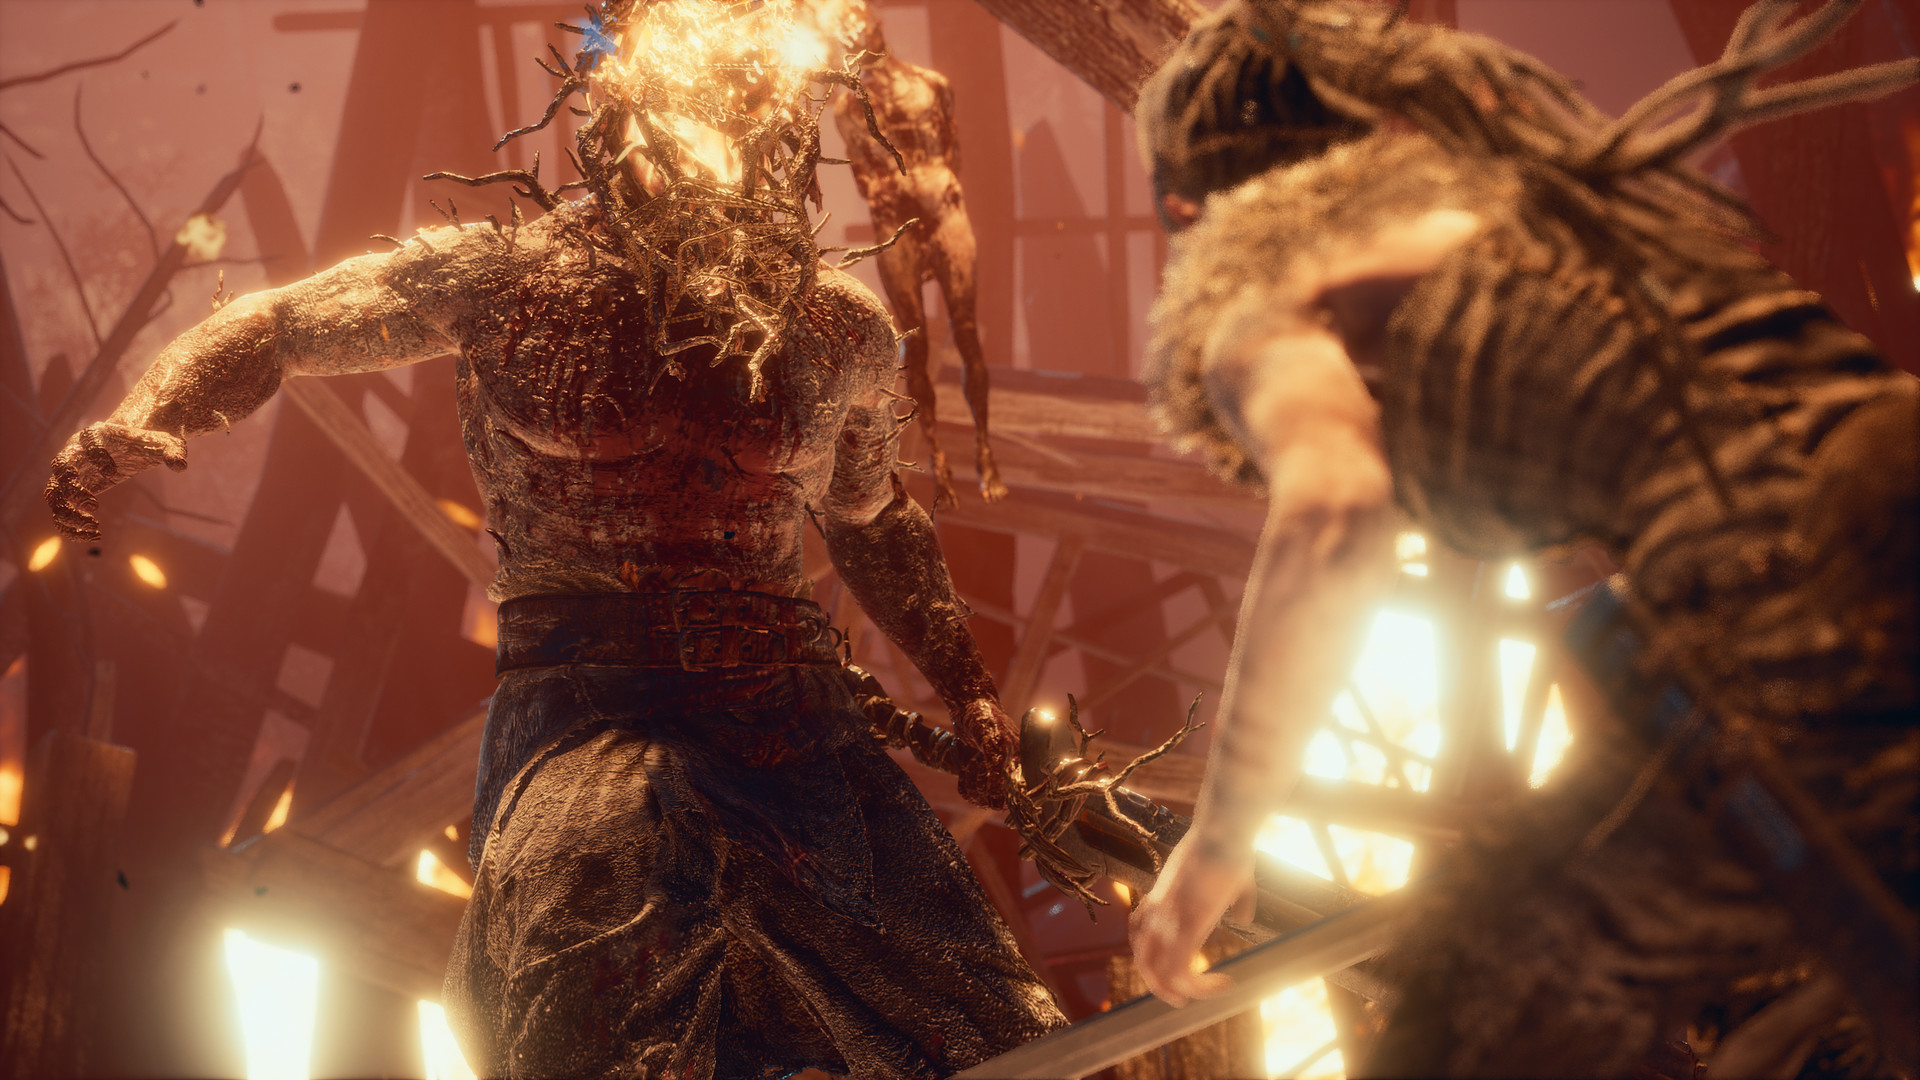 Hellblade: Senua's Sacrifice System Requirements: Can You Run It?